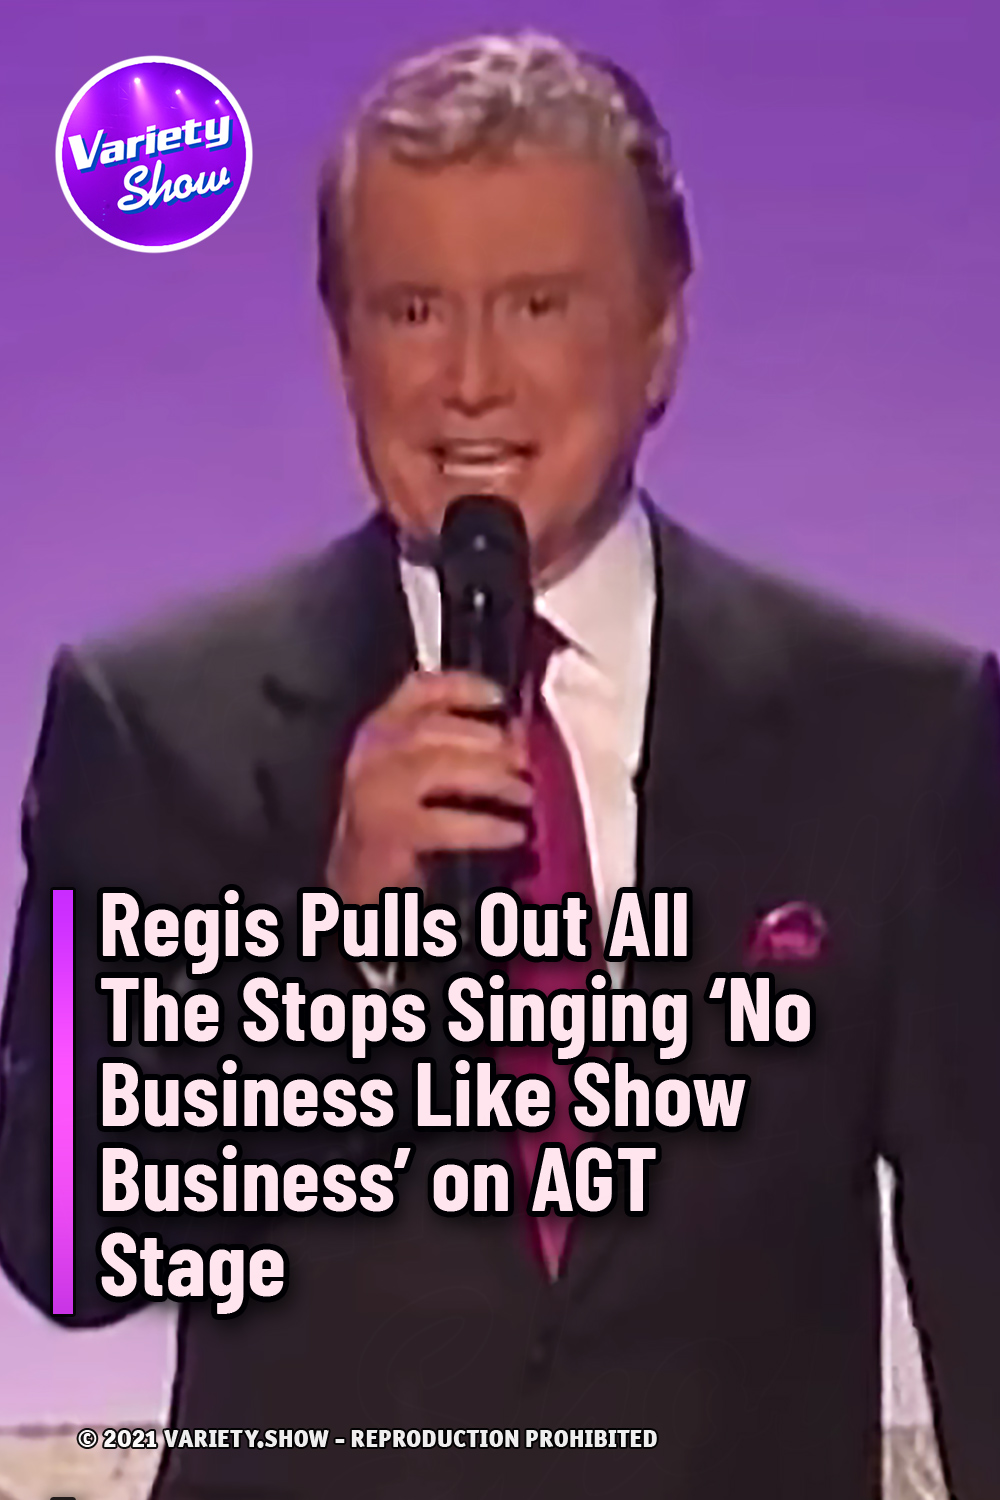 Regis Pulls Out All The Stops Singing ‘No Business Like Show Business’ on AGT Stage